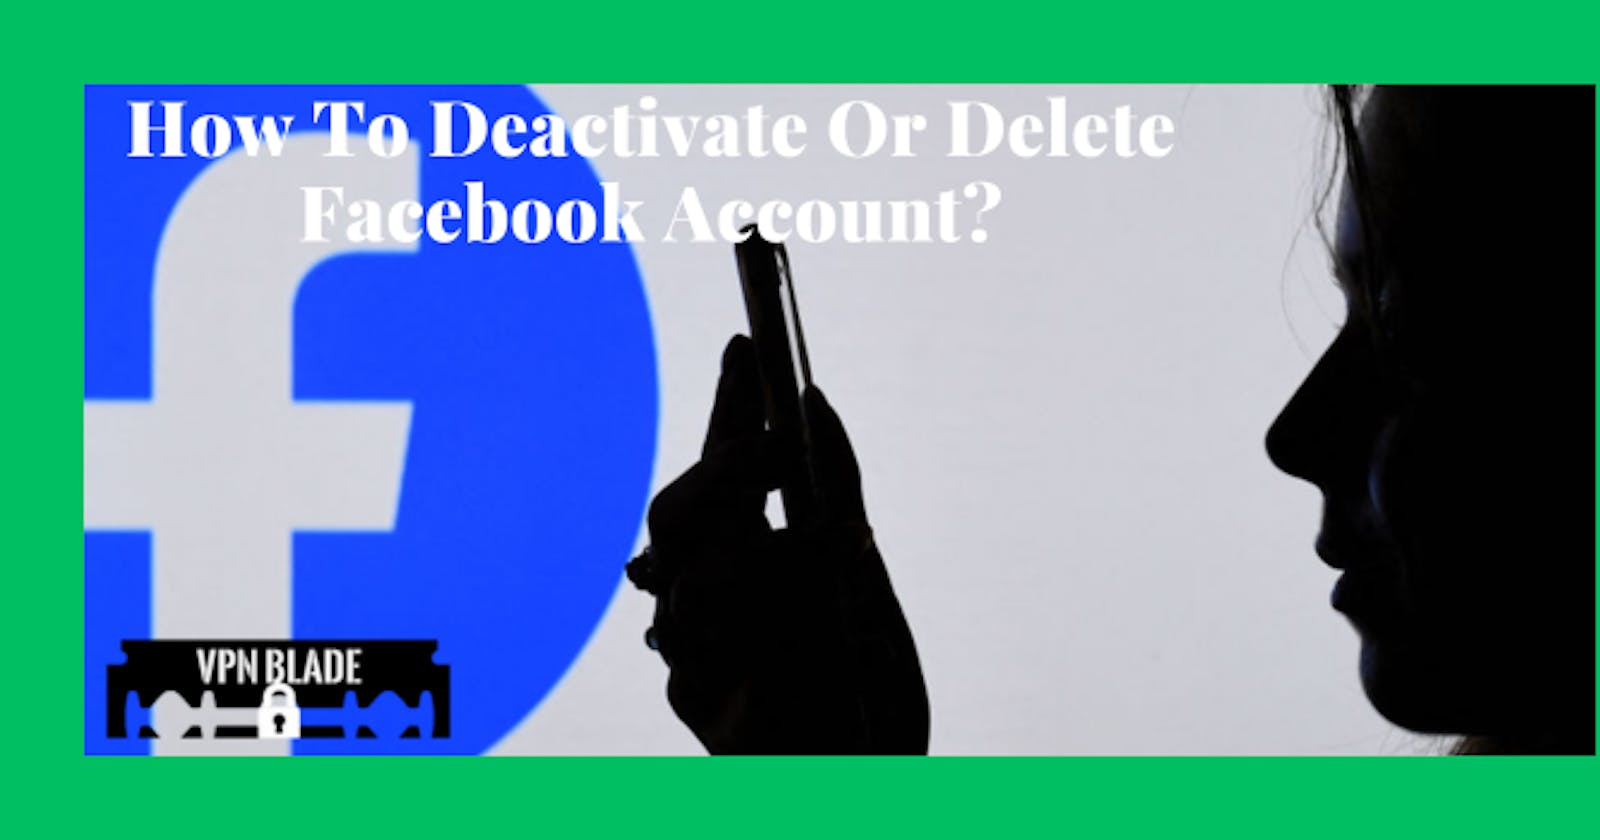 How To Deactivate Or Delete Facebook Account?